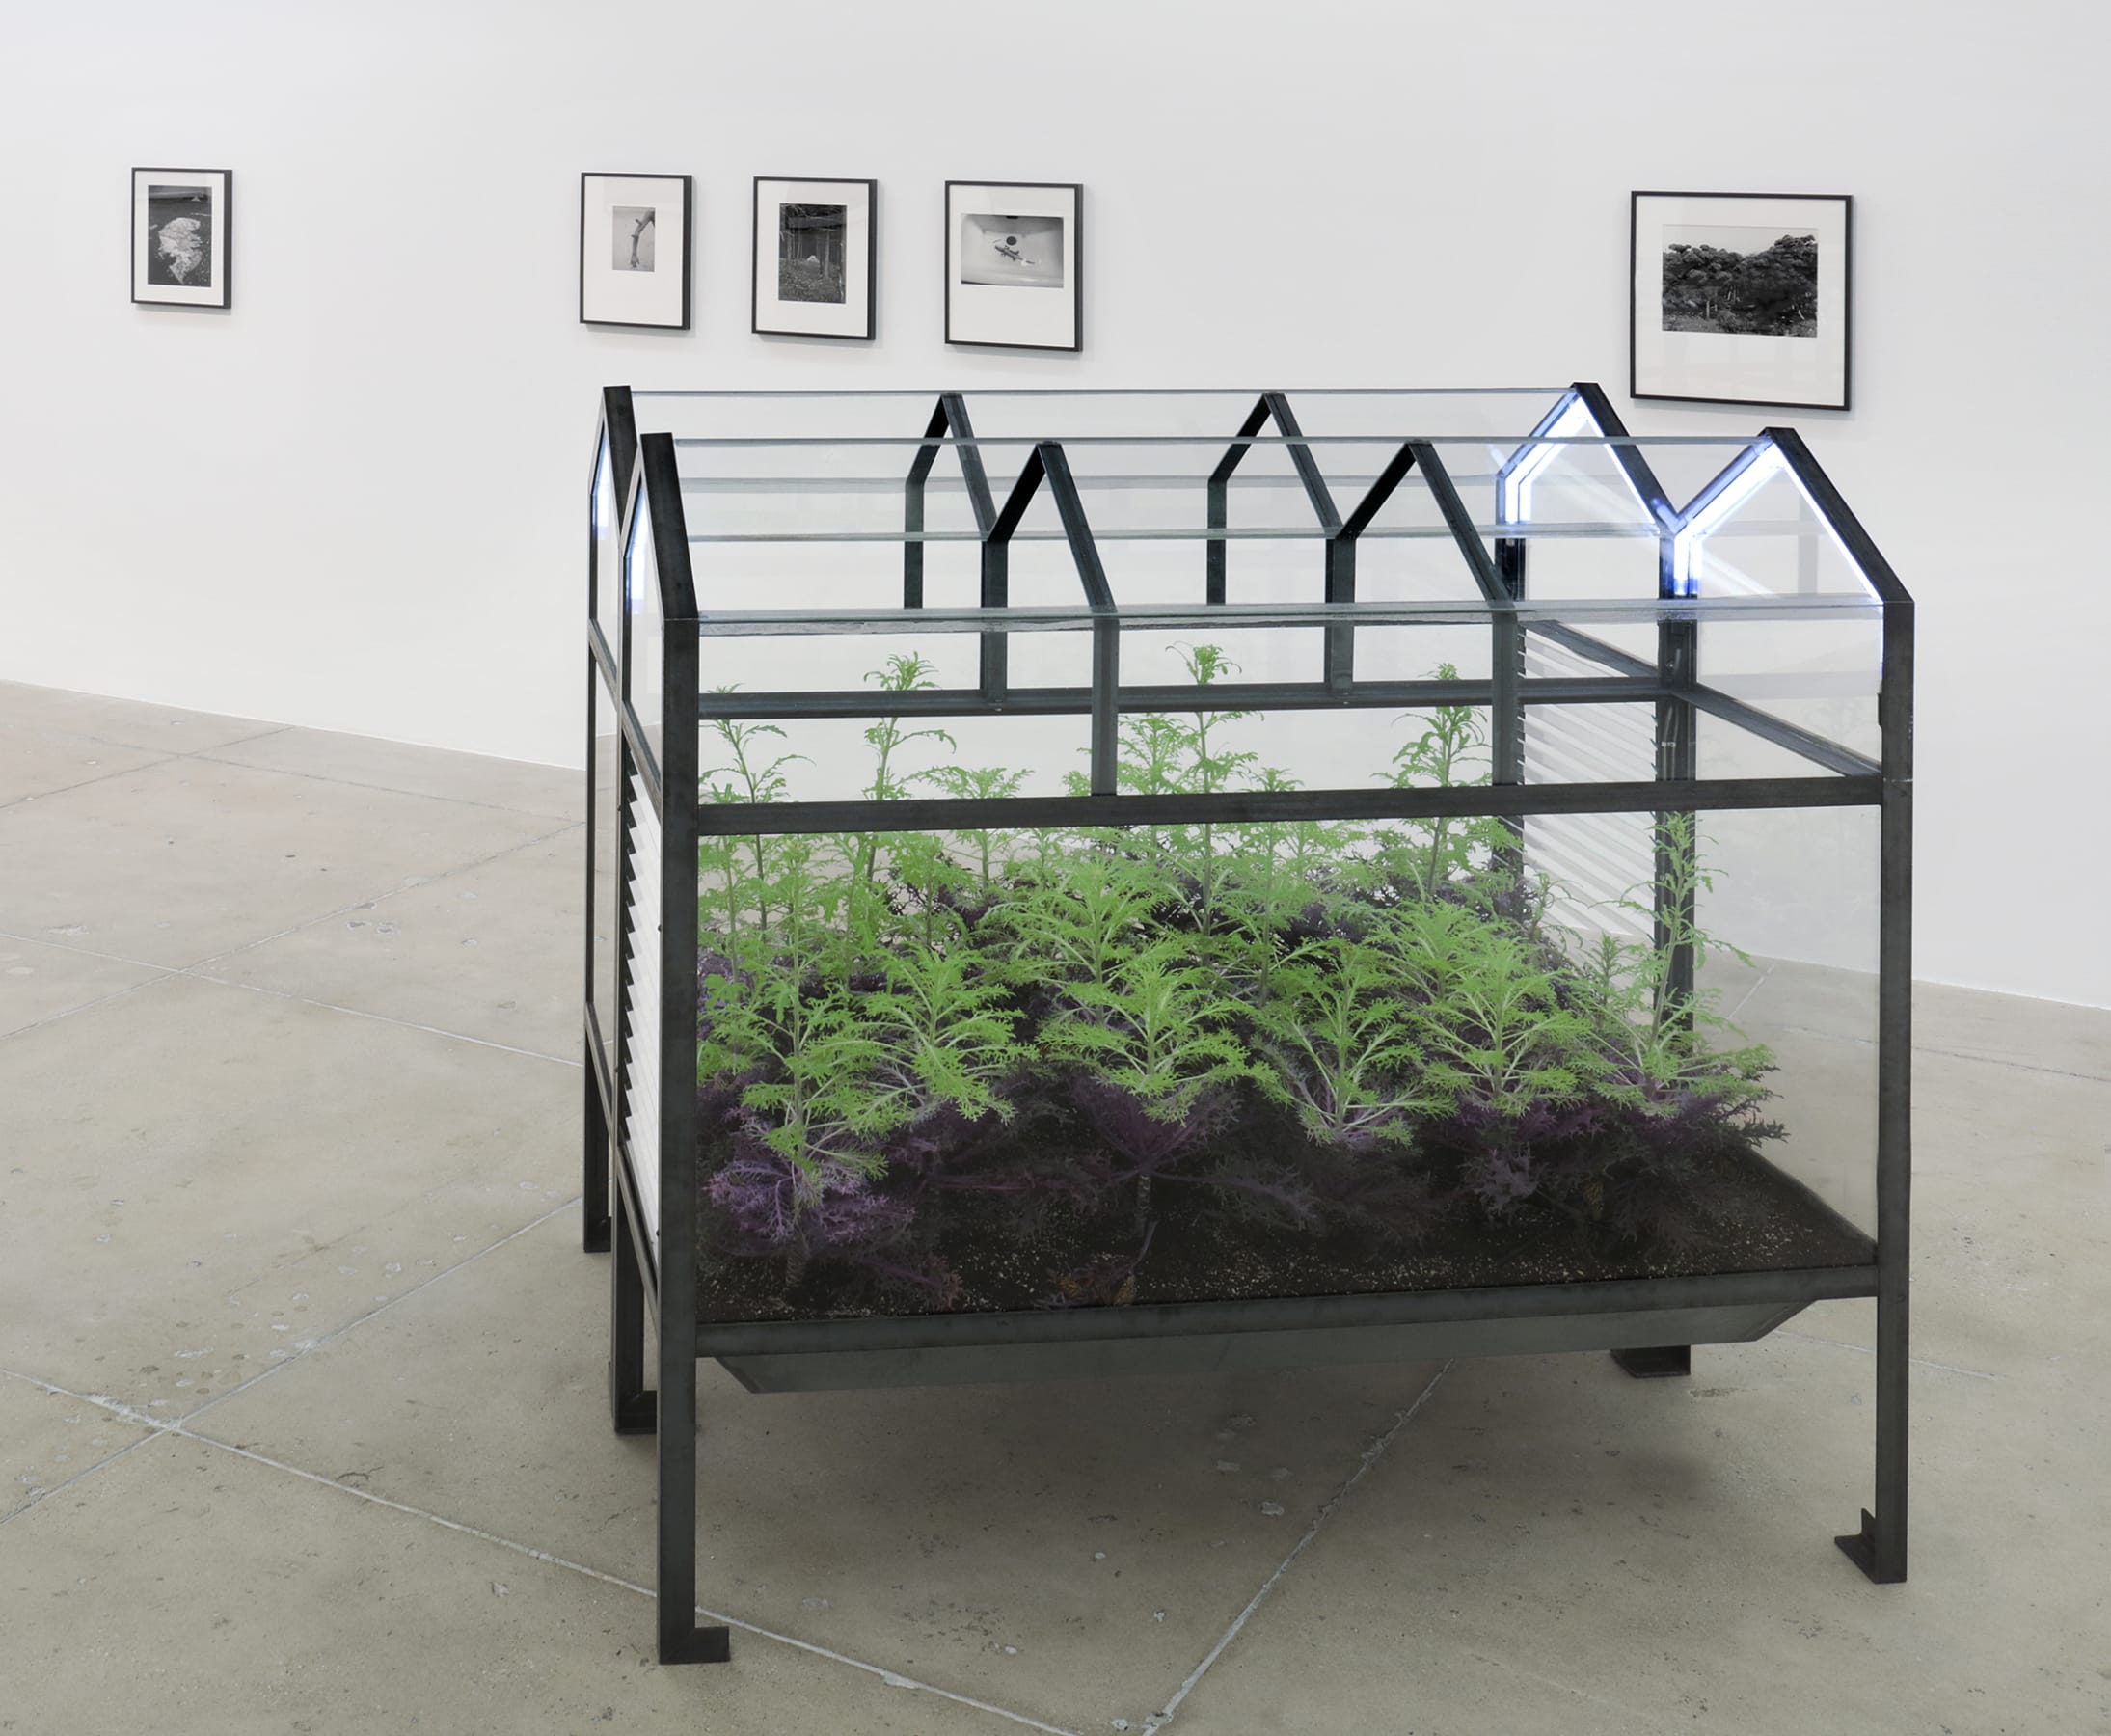 Installation view of Lothar Baumgarten exhibition. The image contains a butterfly conservatory, made from a metal frame, glass, kale, butterflies, soil, and neon tubes.